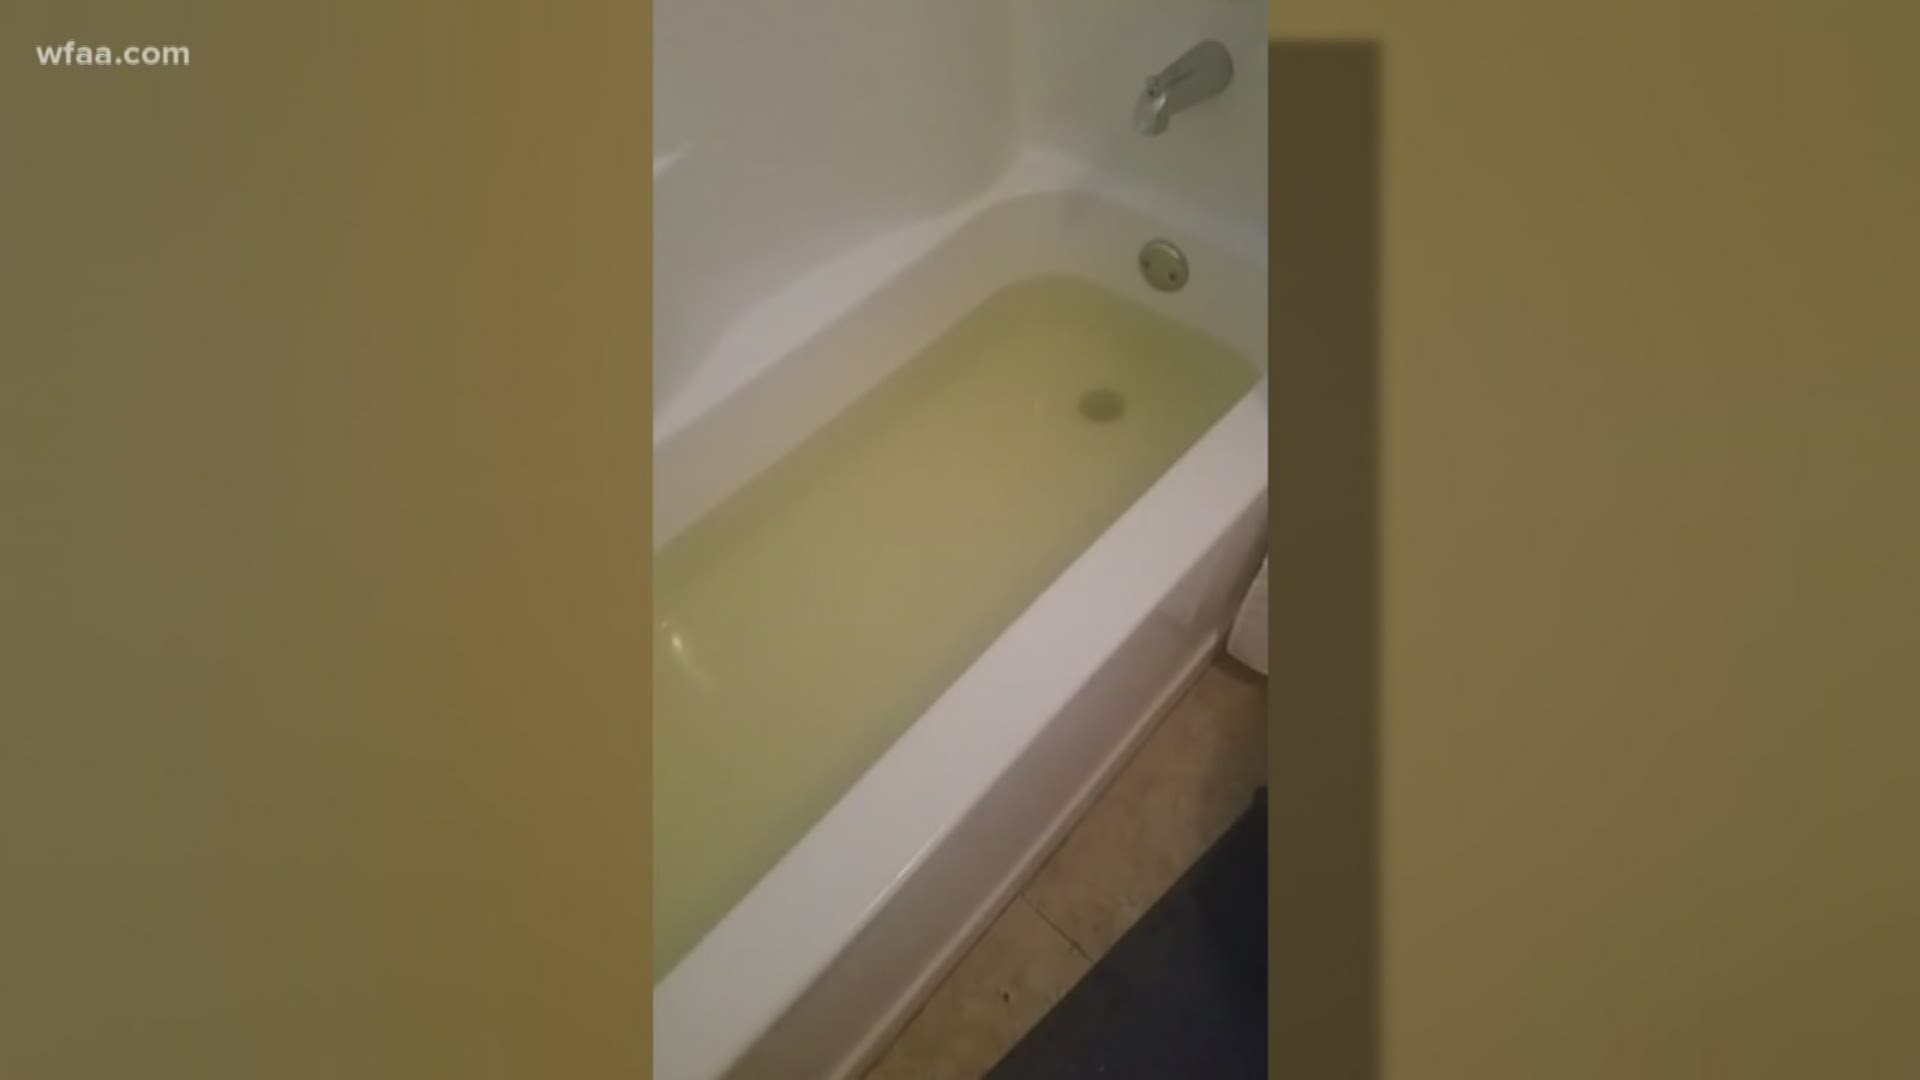 Dallas neighbors disturbed by brown water